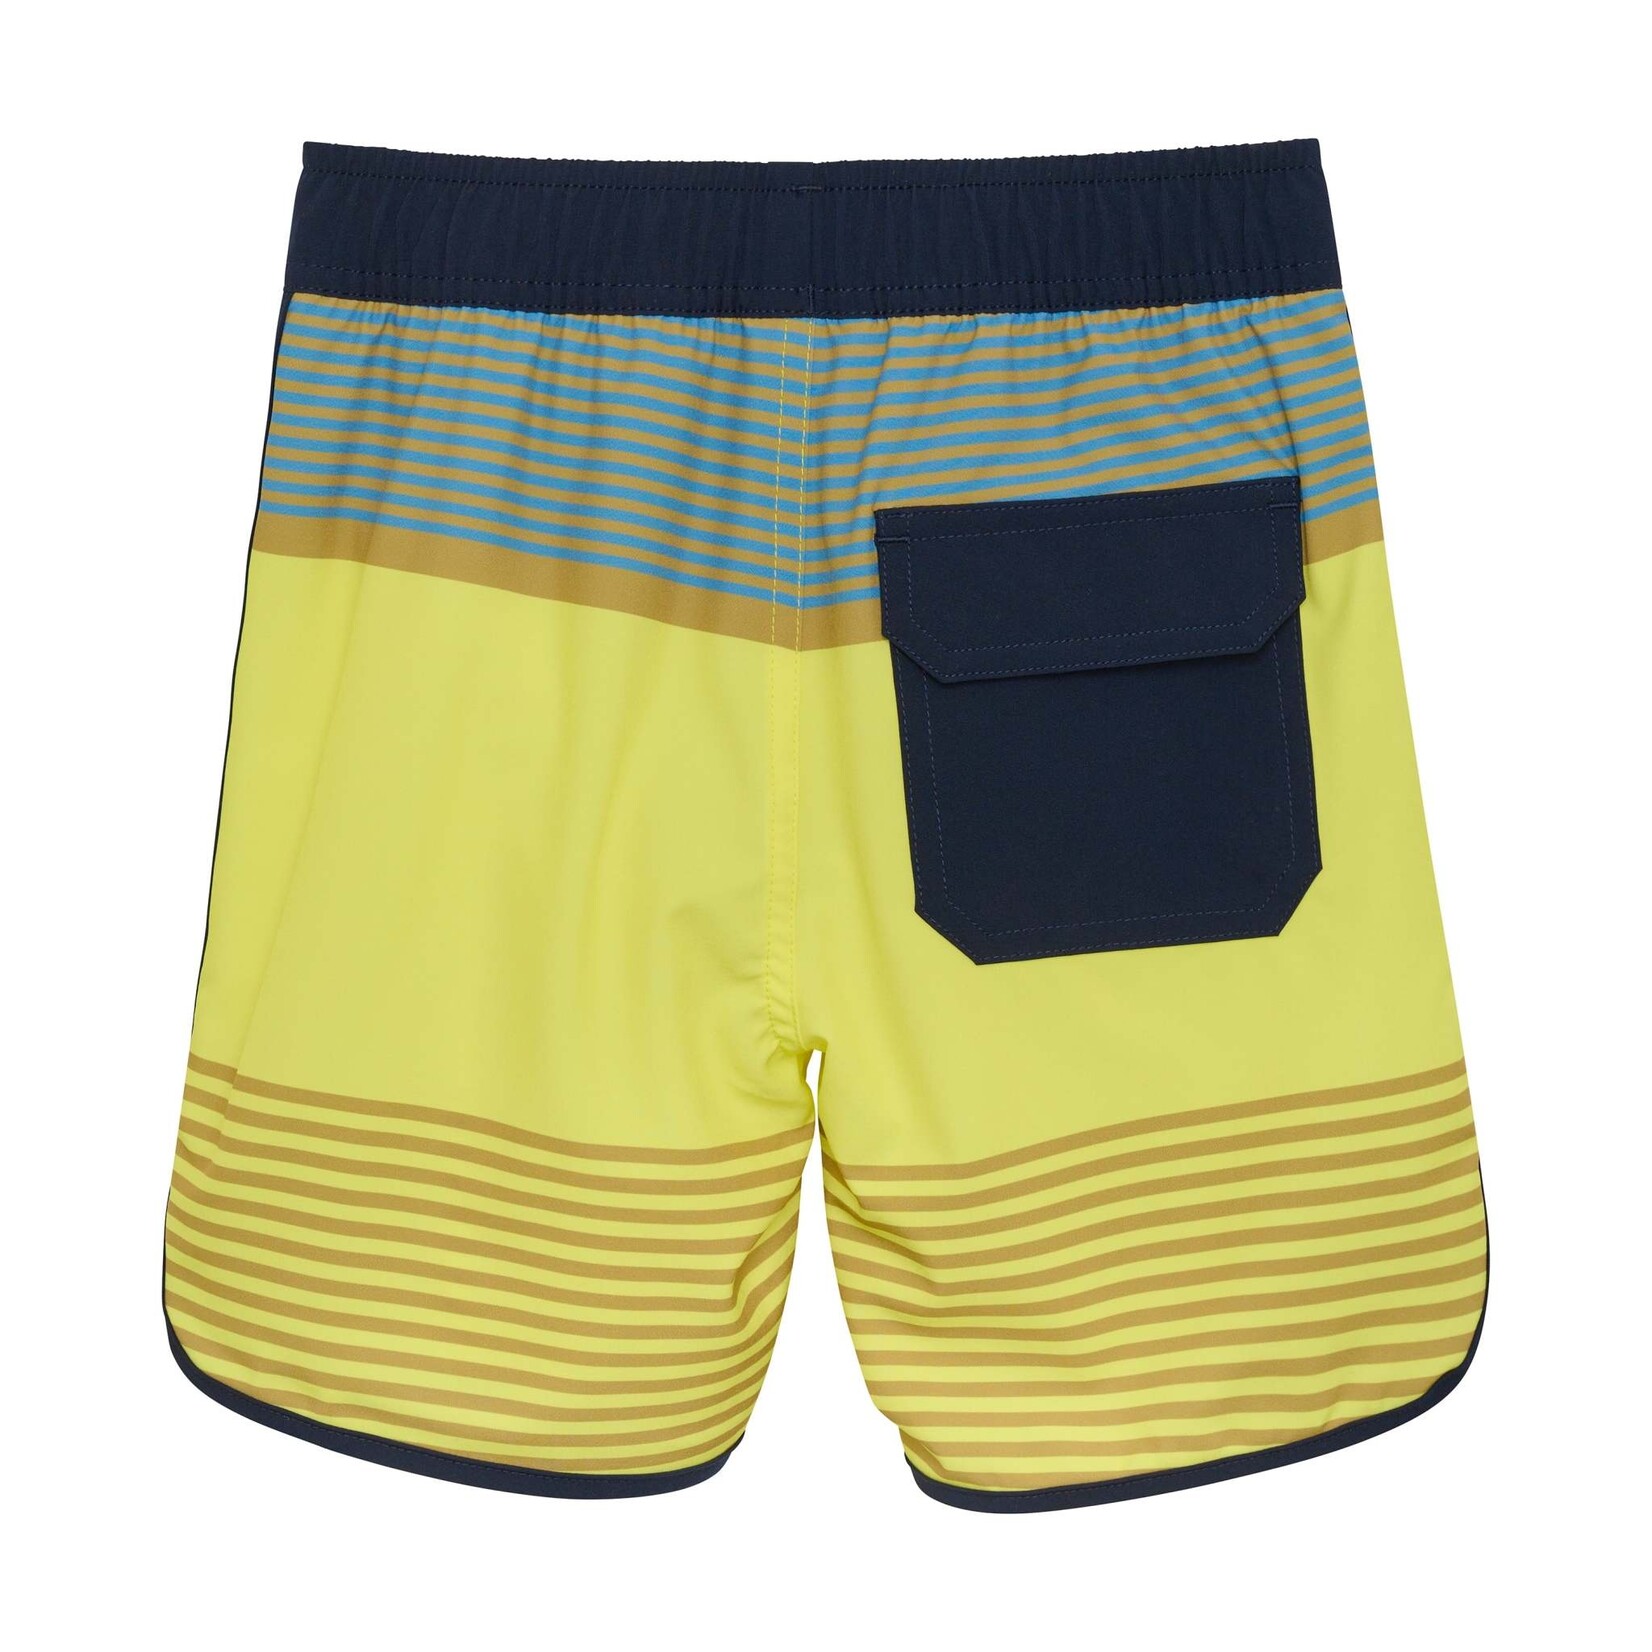 Color Kids COLOR KIDS - Yellow, caramel, green and navy-striped boardshorts